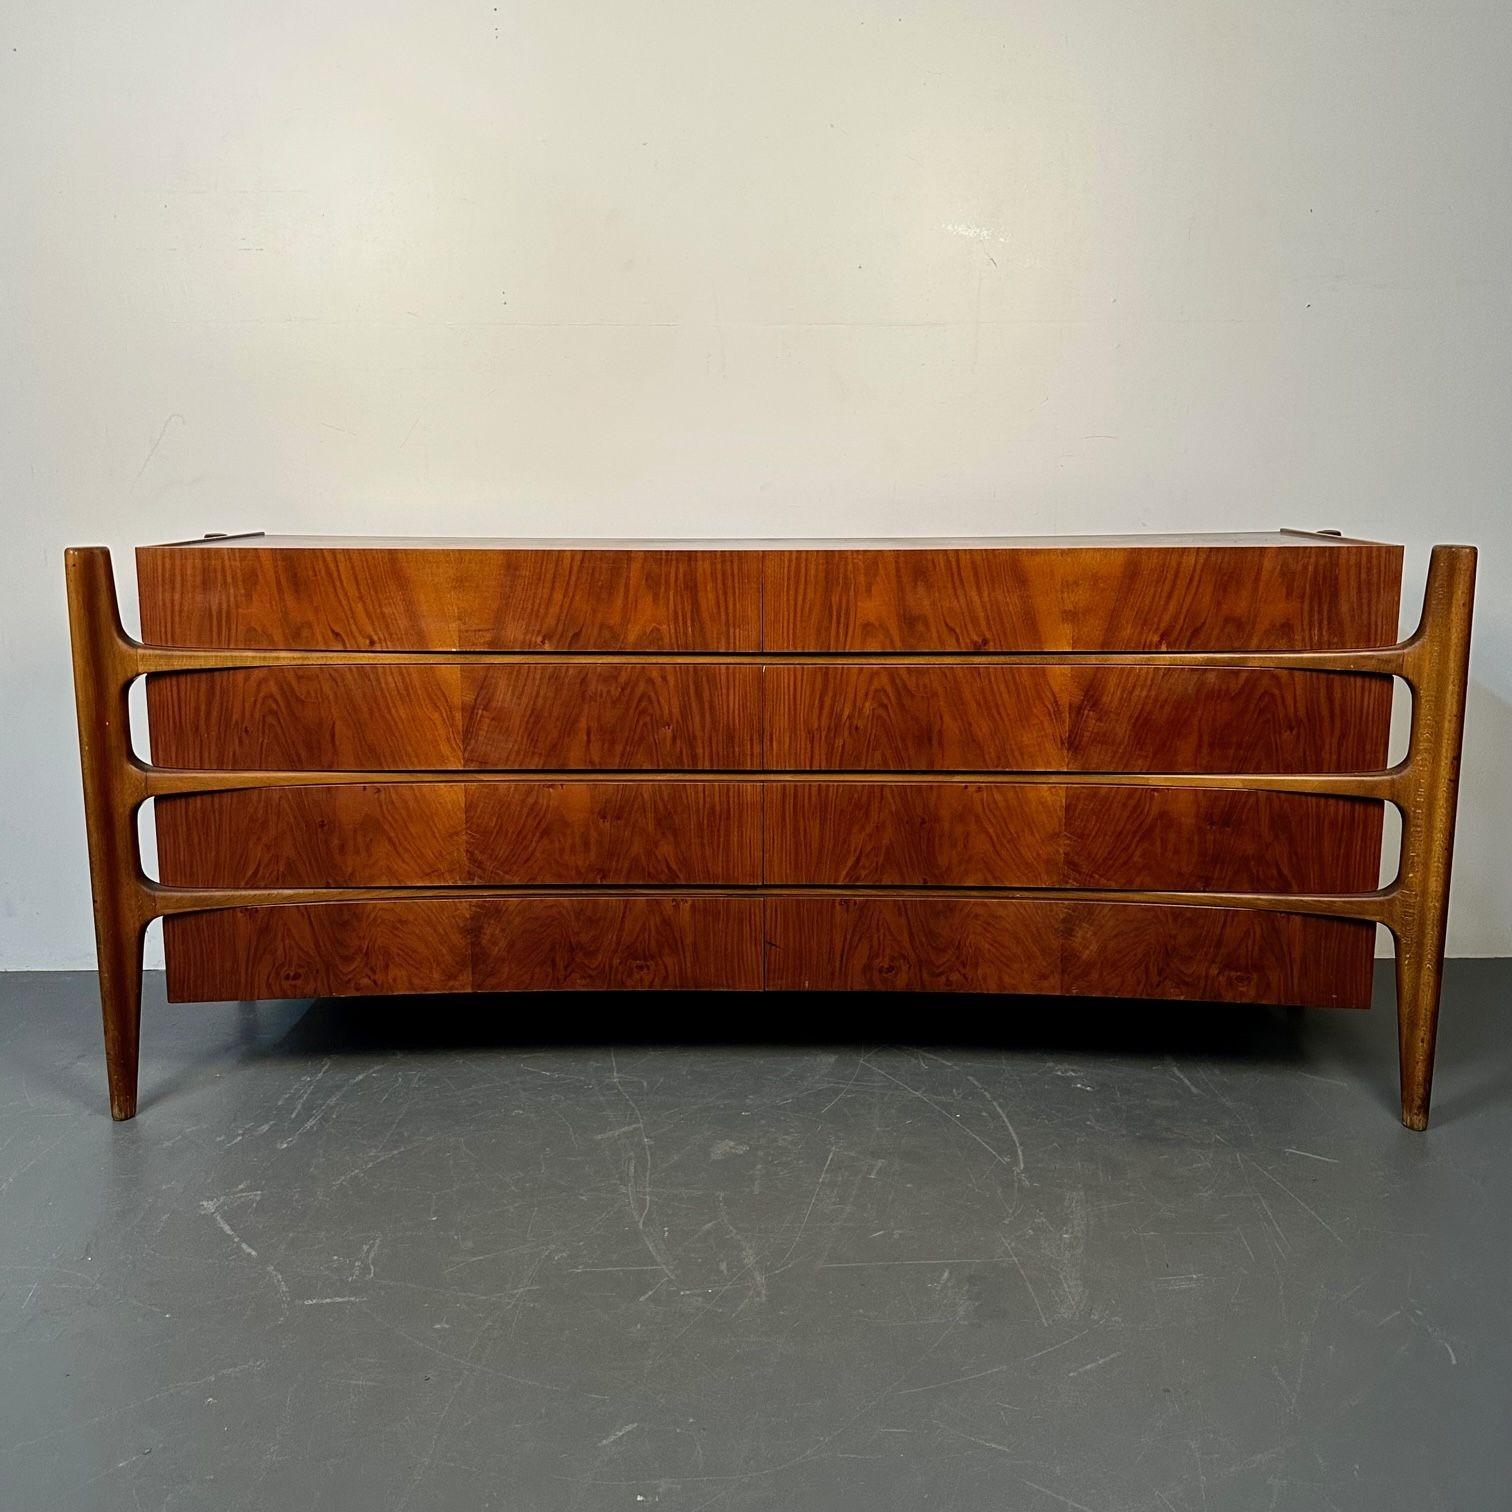 William Hinn, Swedish Mid-Century Modern, Exoskeleton, Sculptural Curved Dresser, Sweden, 1960s

Rare Swedish modern case piece designed by William Hinn and produced in Sweden circa 1960s. This dresser has eight drawers each having book-matched